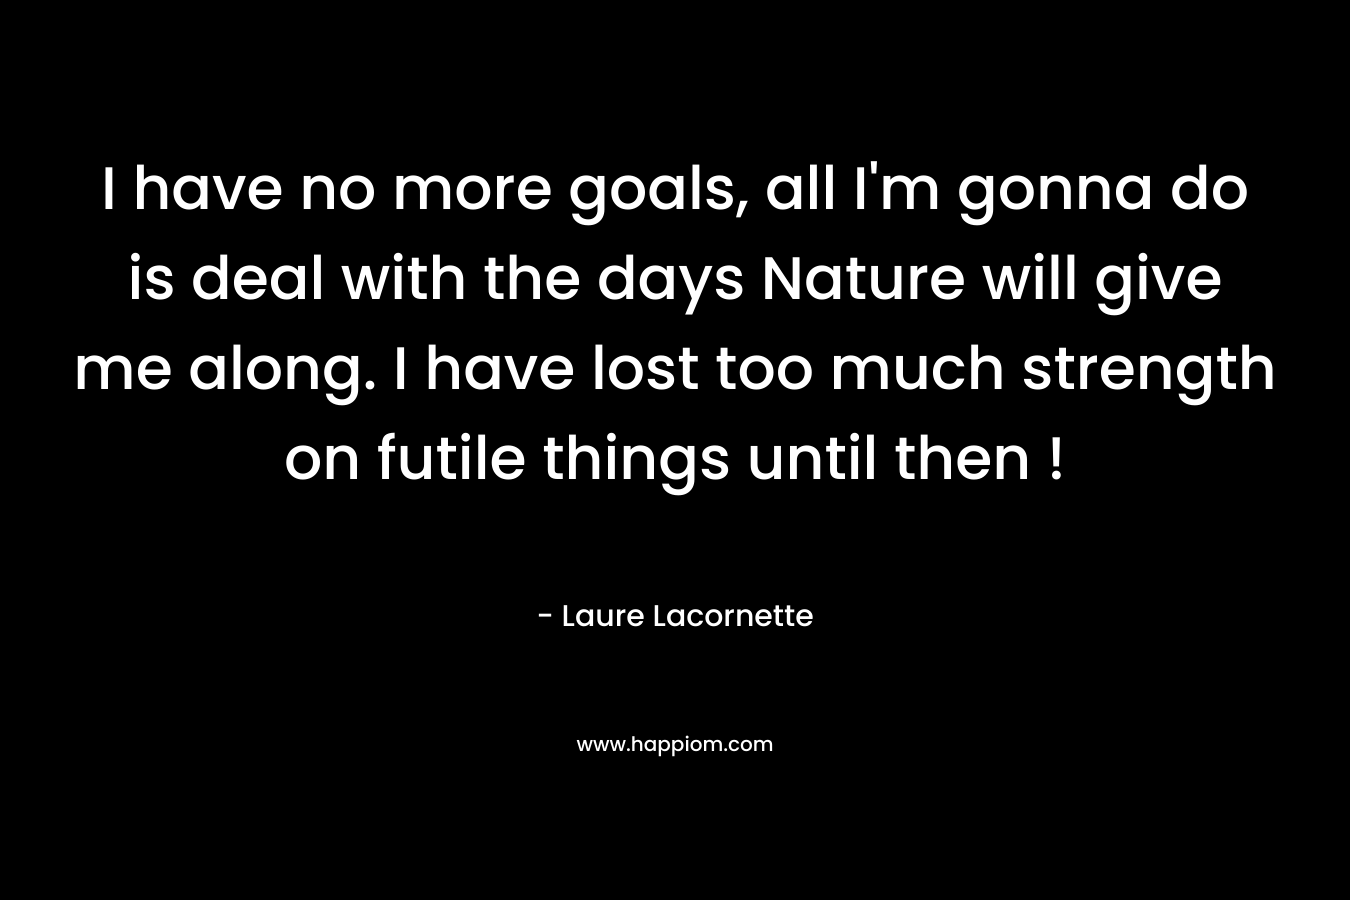 I have no more goals, all I’m gonna do is deal with the days Nature will give me along. I have lost too much strength on futile things until then ! – Laure Lacornette